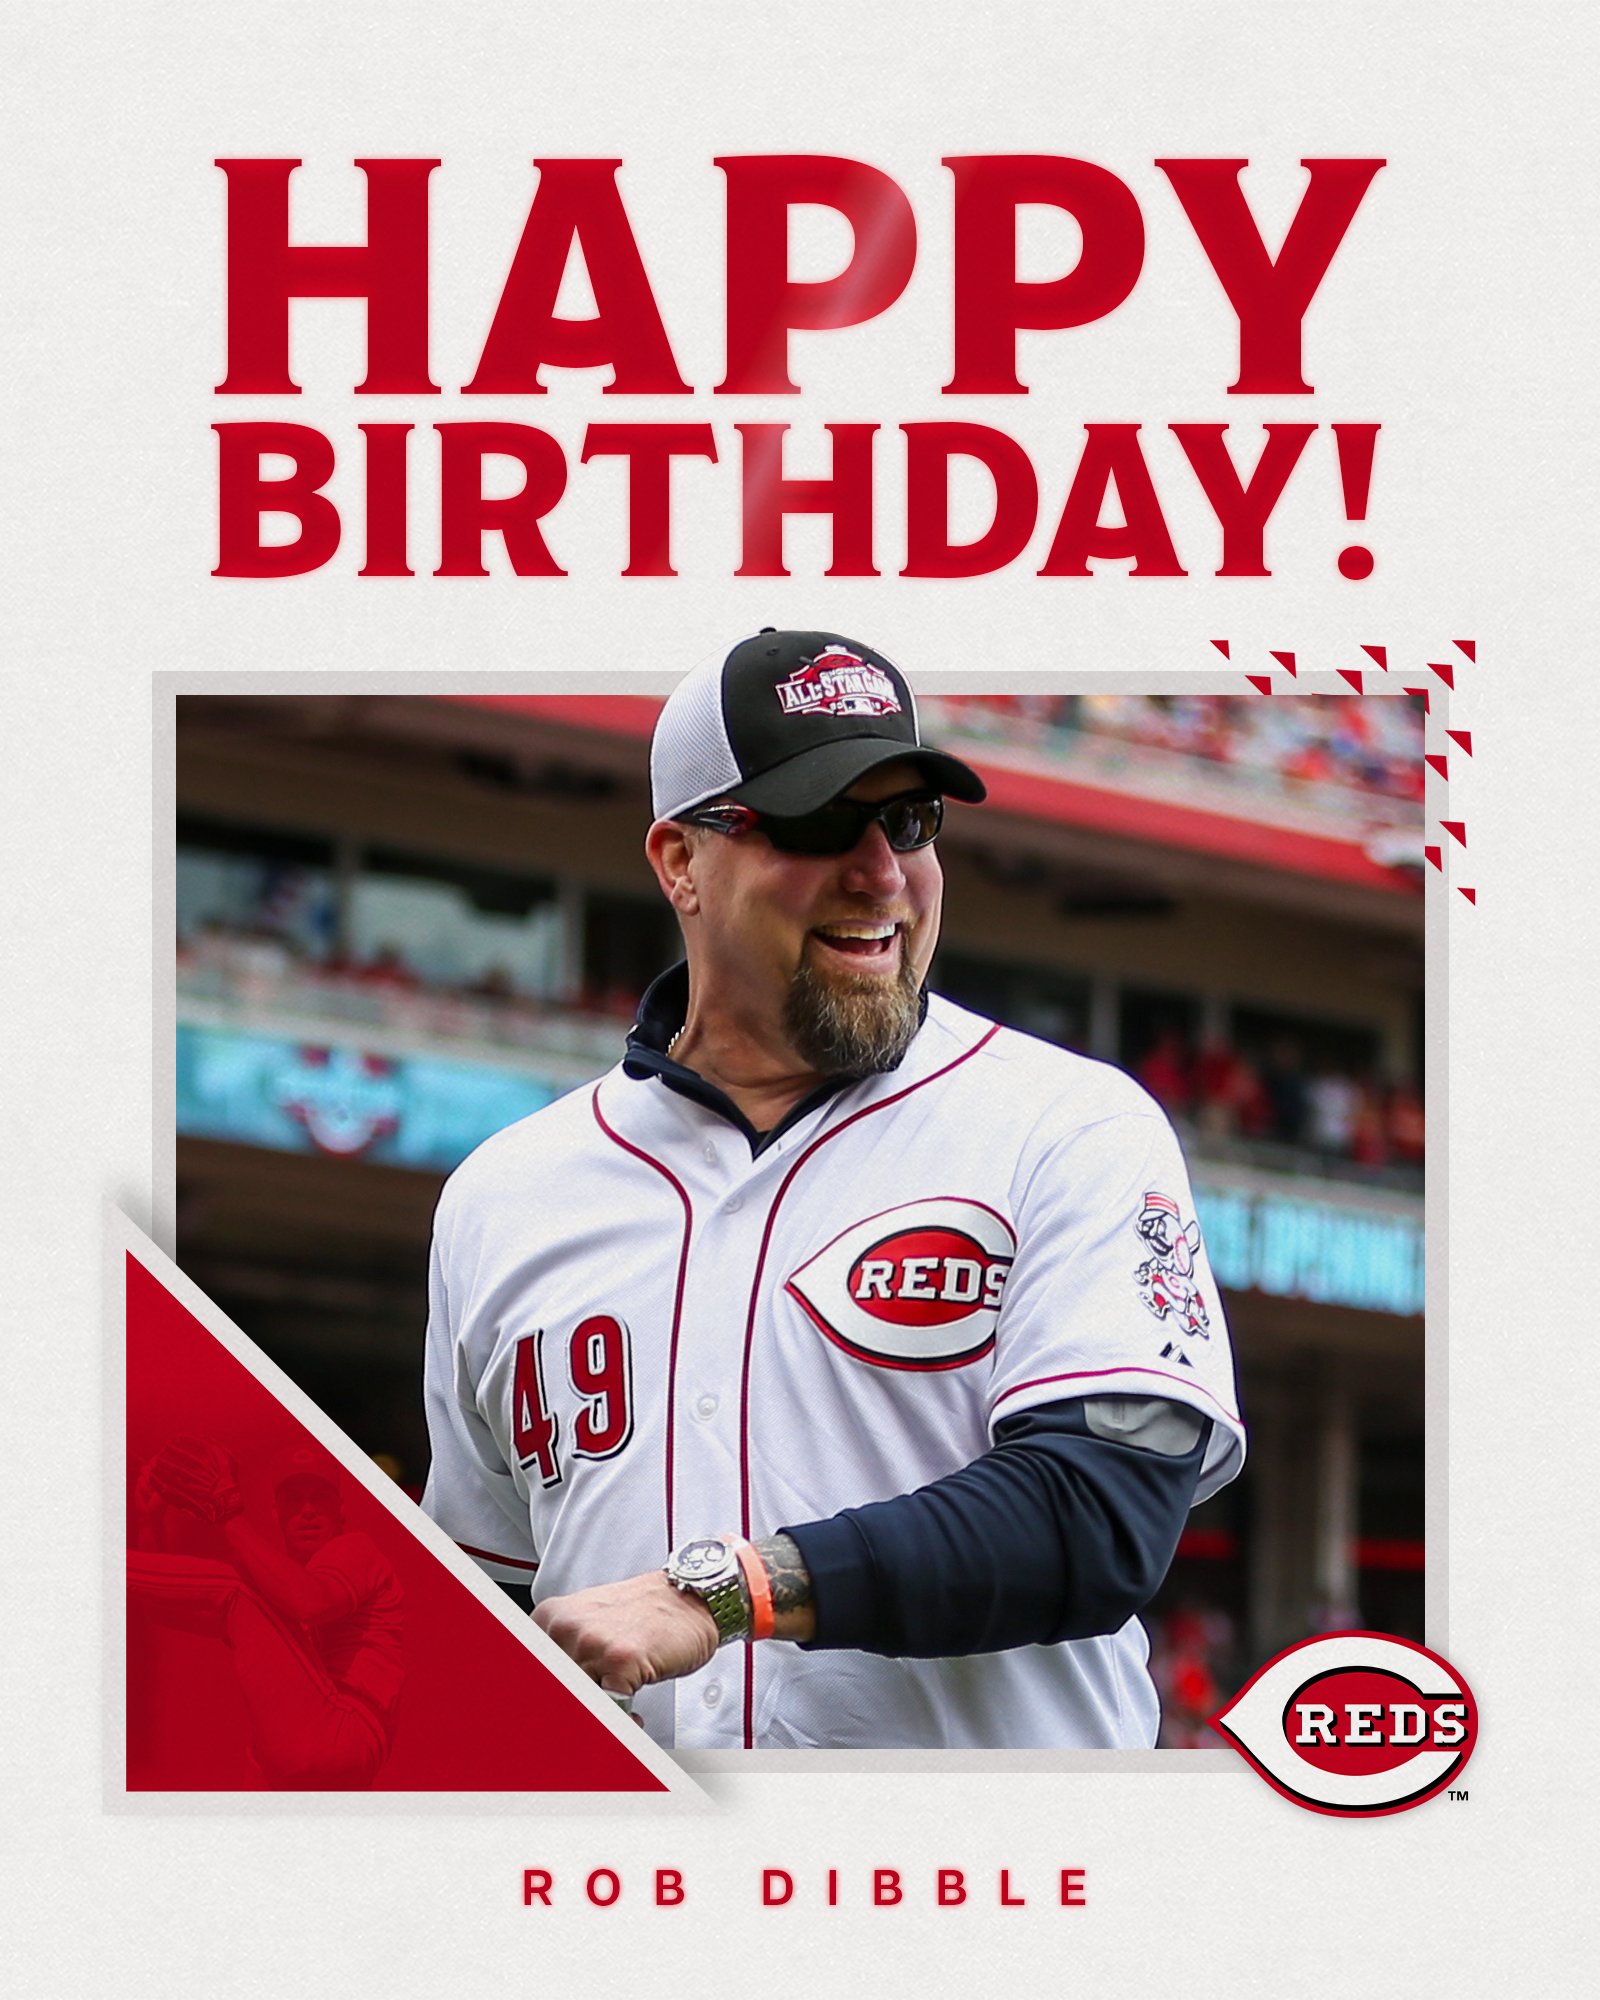 Cincinnati Reds on X: Happy birthday to the 1999 NL Rookie of the